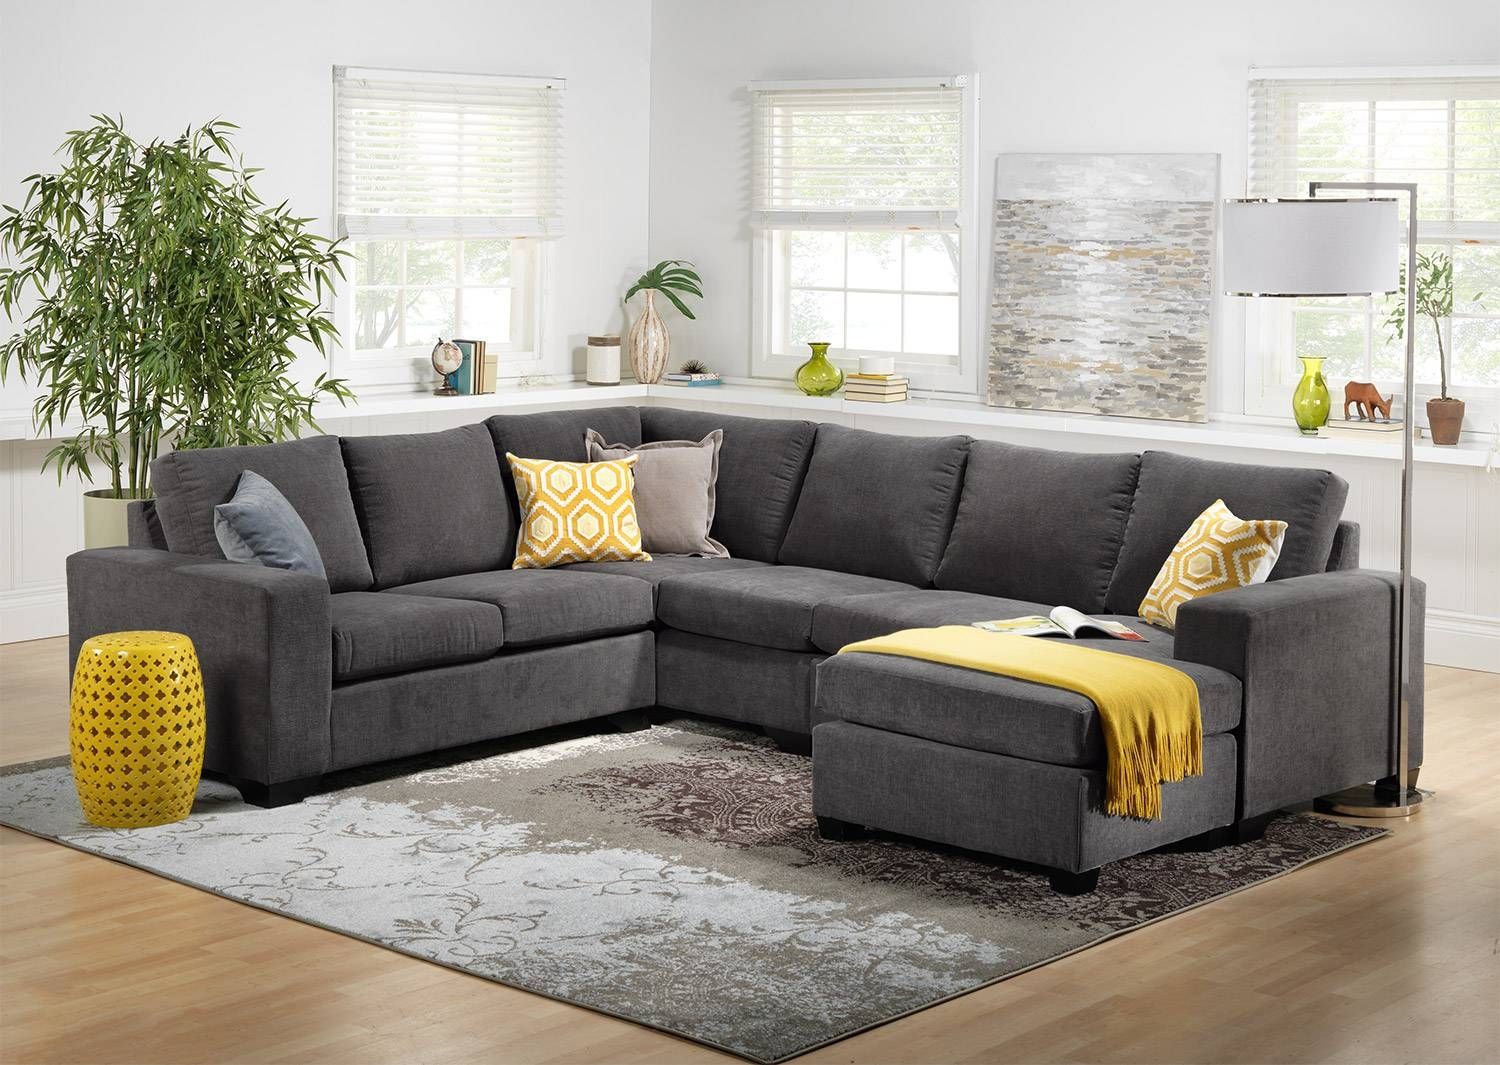 Stunning Cozy Sectional Sofas 58 For Your Couch Cover For Throughout Cozy Sectional Sofas (View 27 of 30)